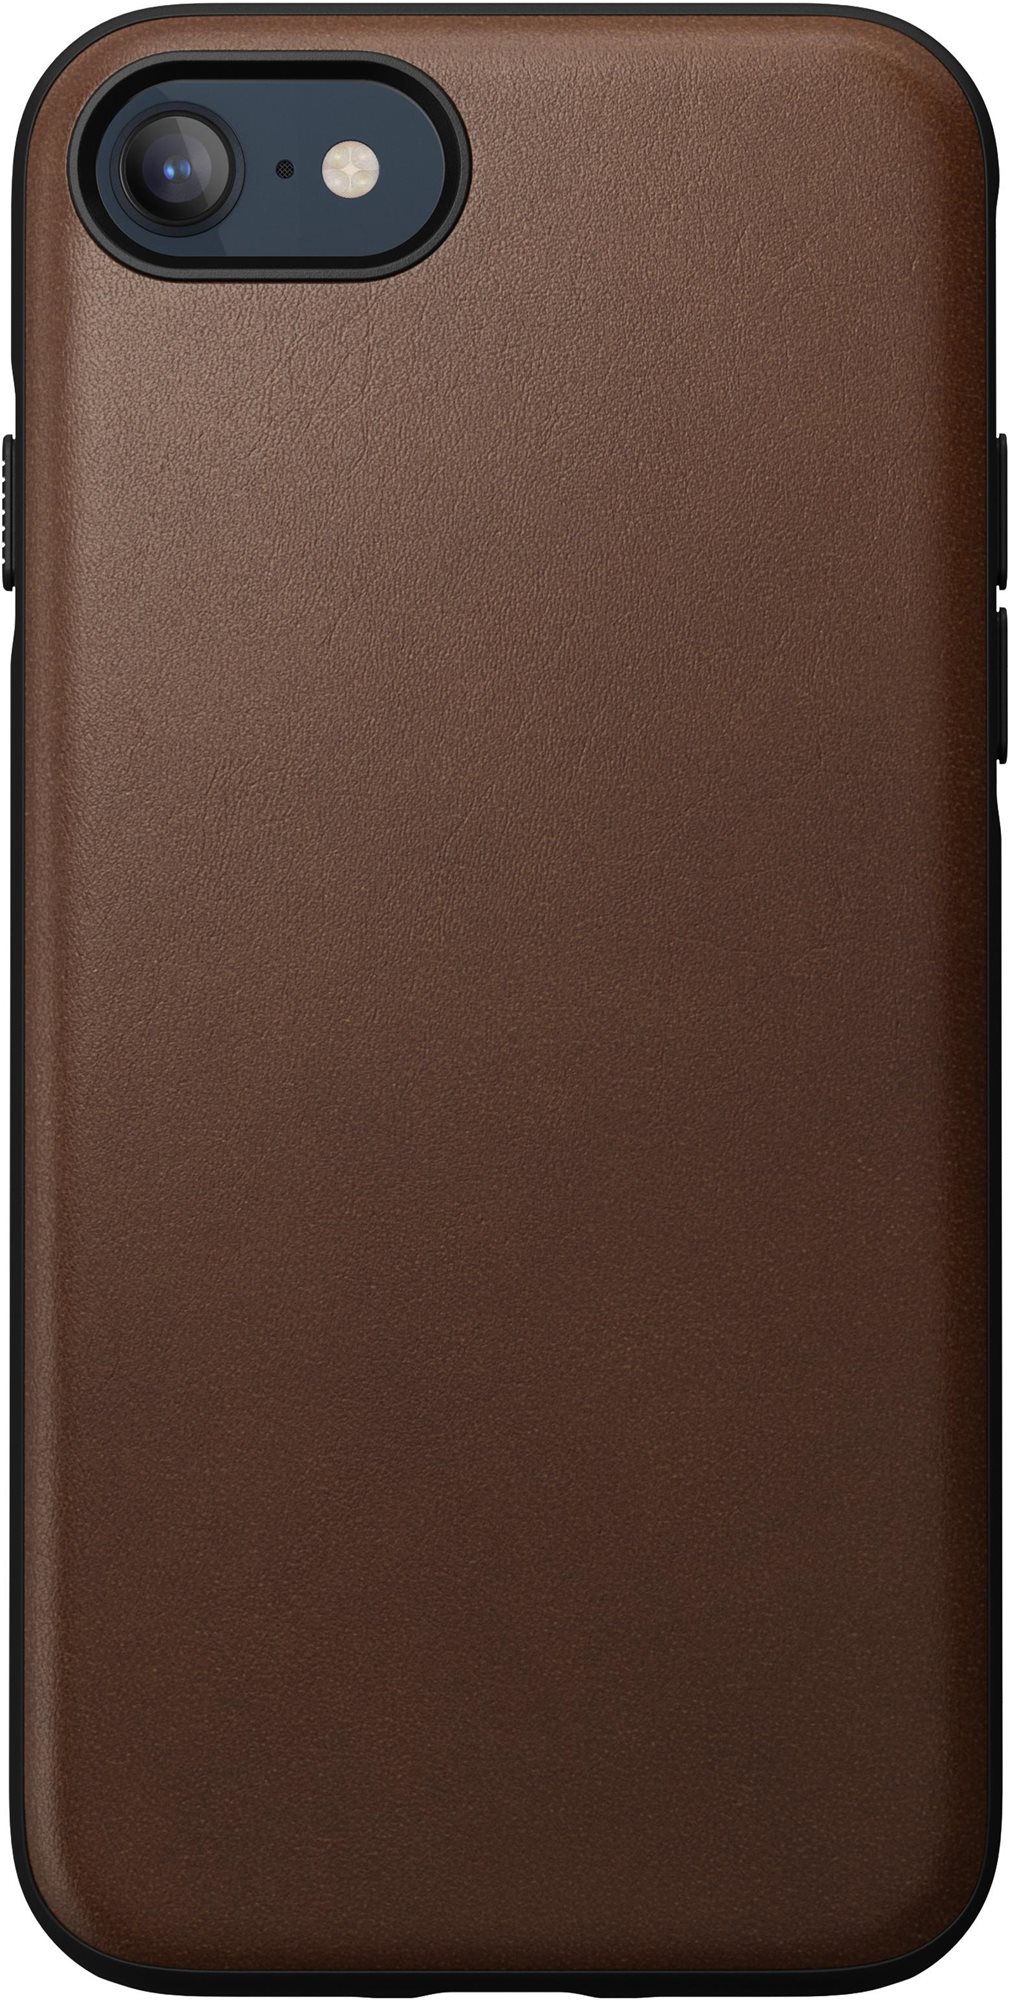 Nomad Modern Leather Case Brown iPhone SE